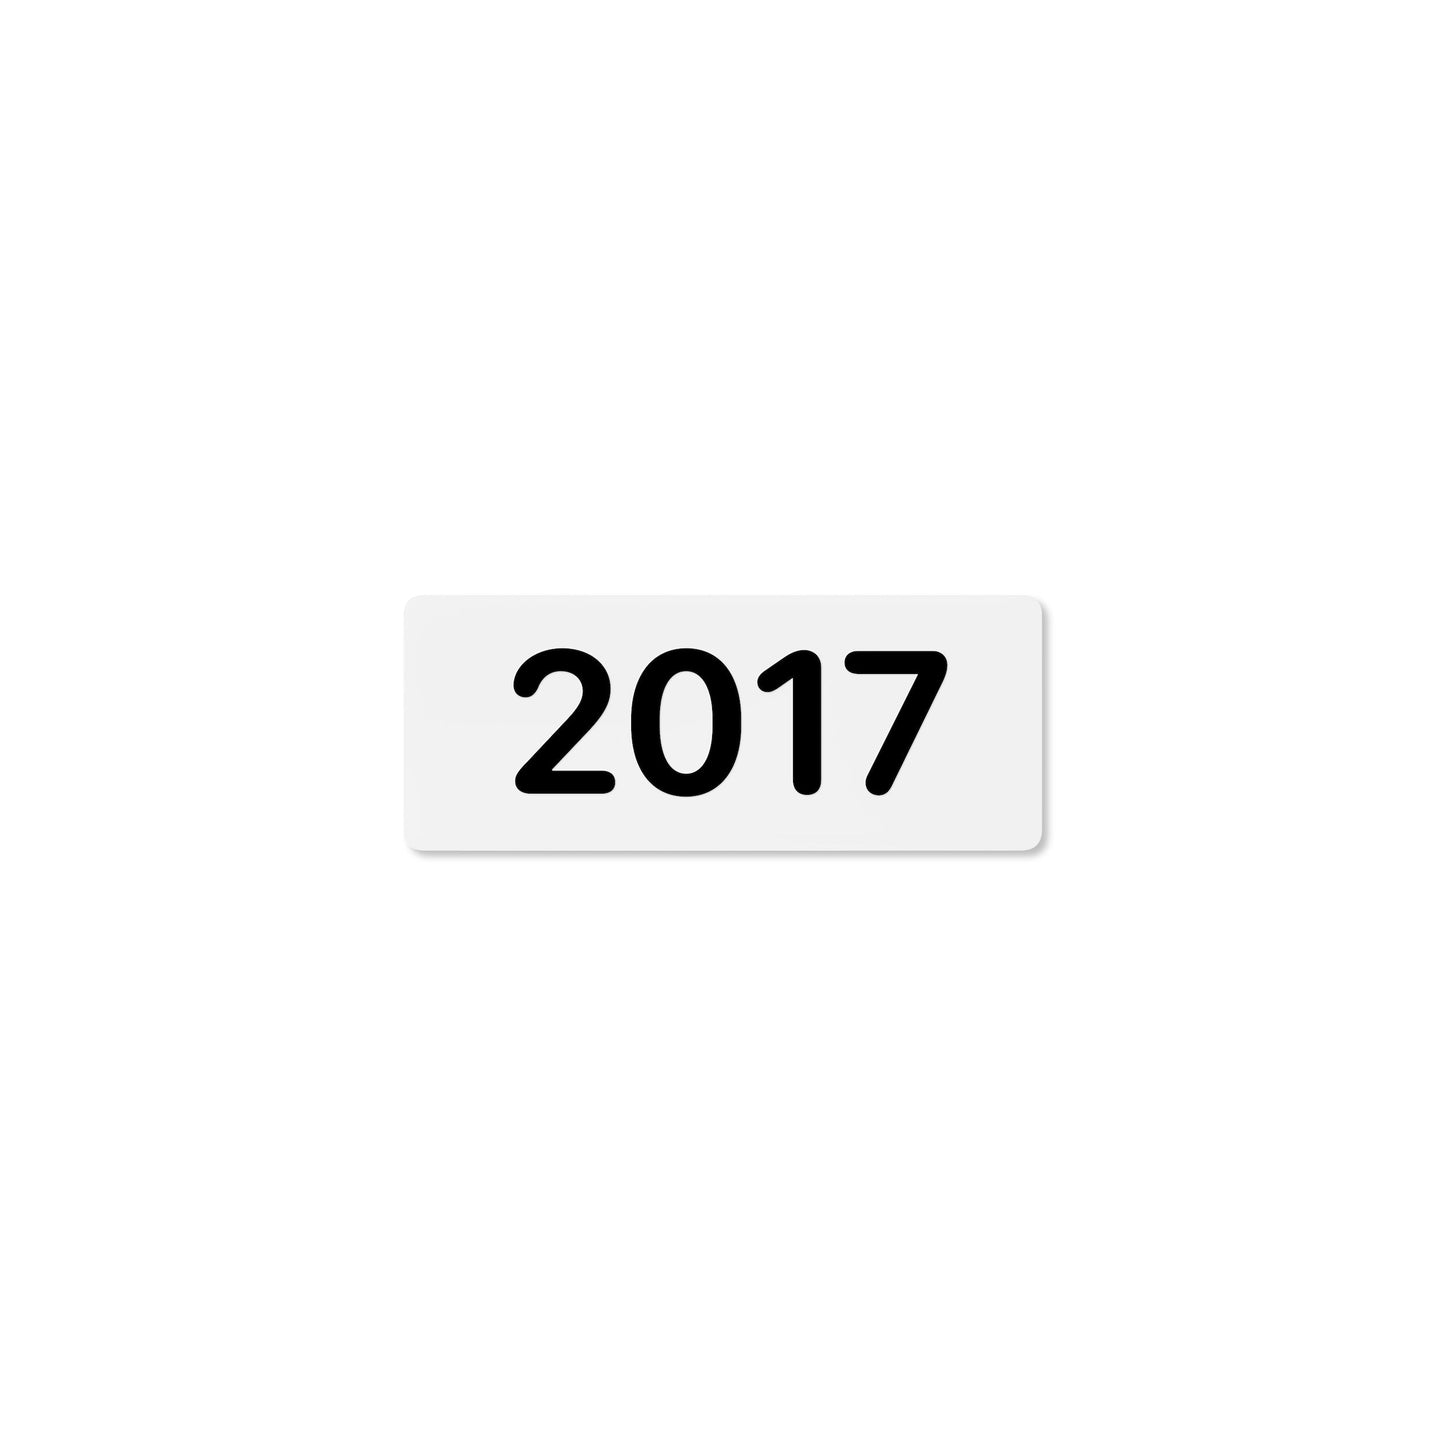 Numeral 2017